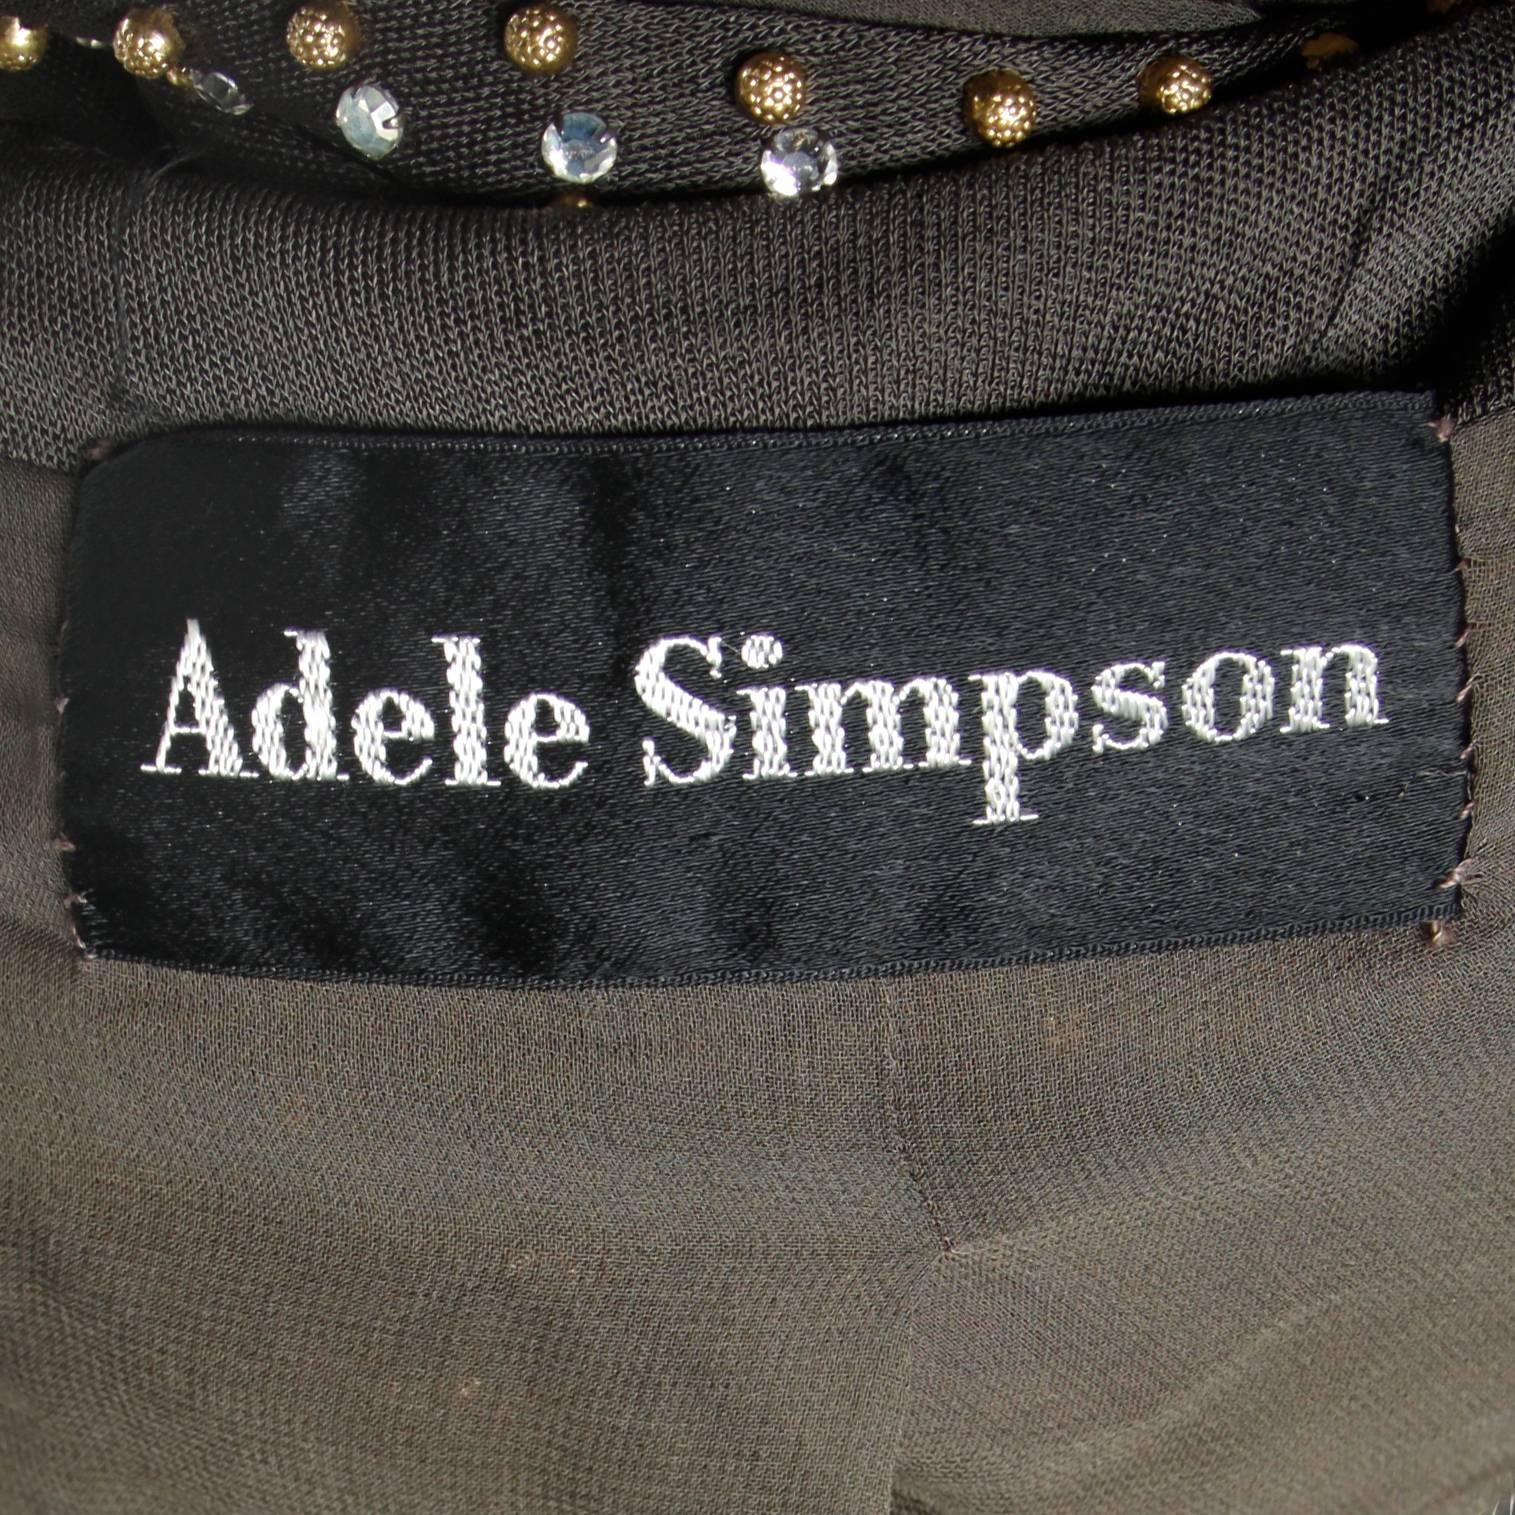 Adele Simpson Vintage Crystal Rhinestone + Beaded Silk Jersey Jacket In Excellent Condition For Sale In Sparks, NV